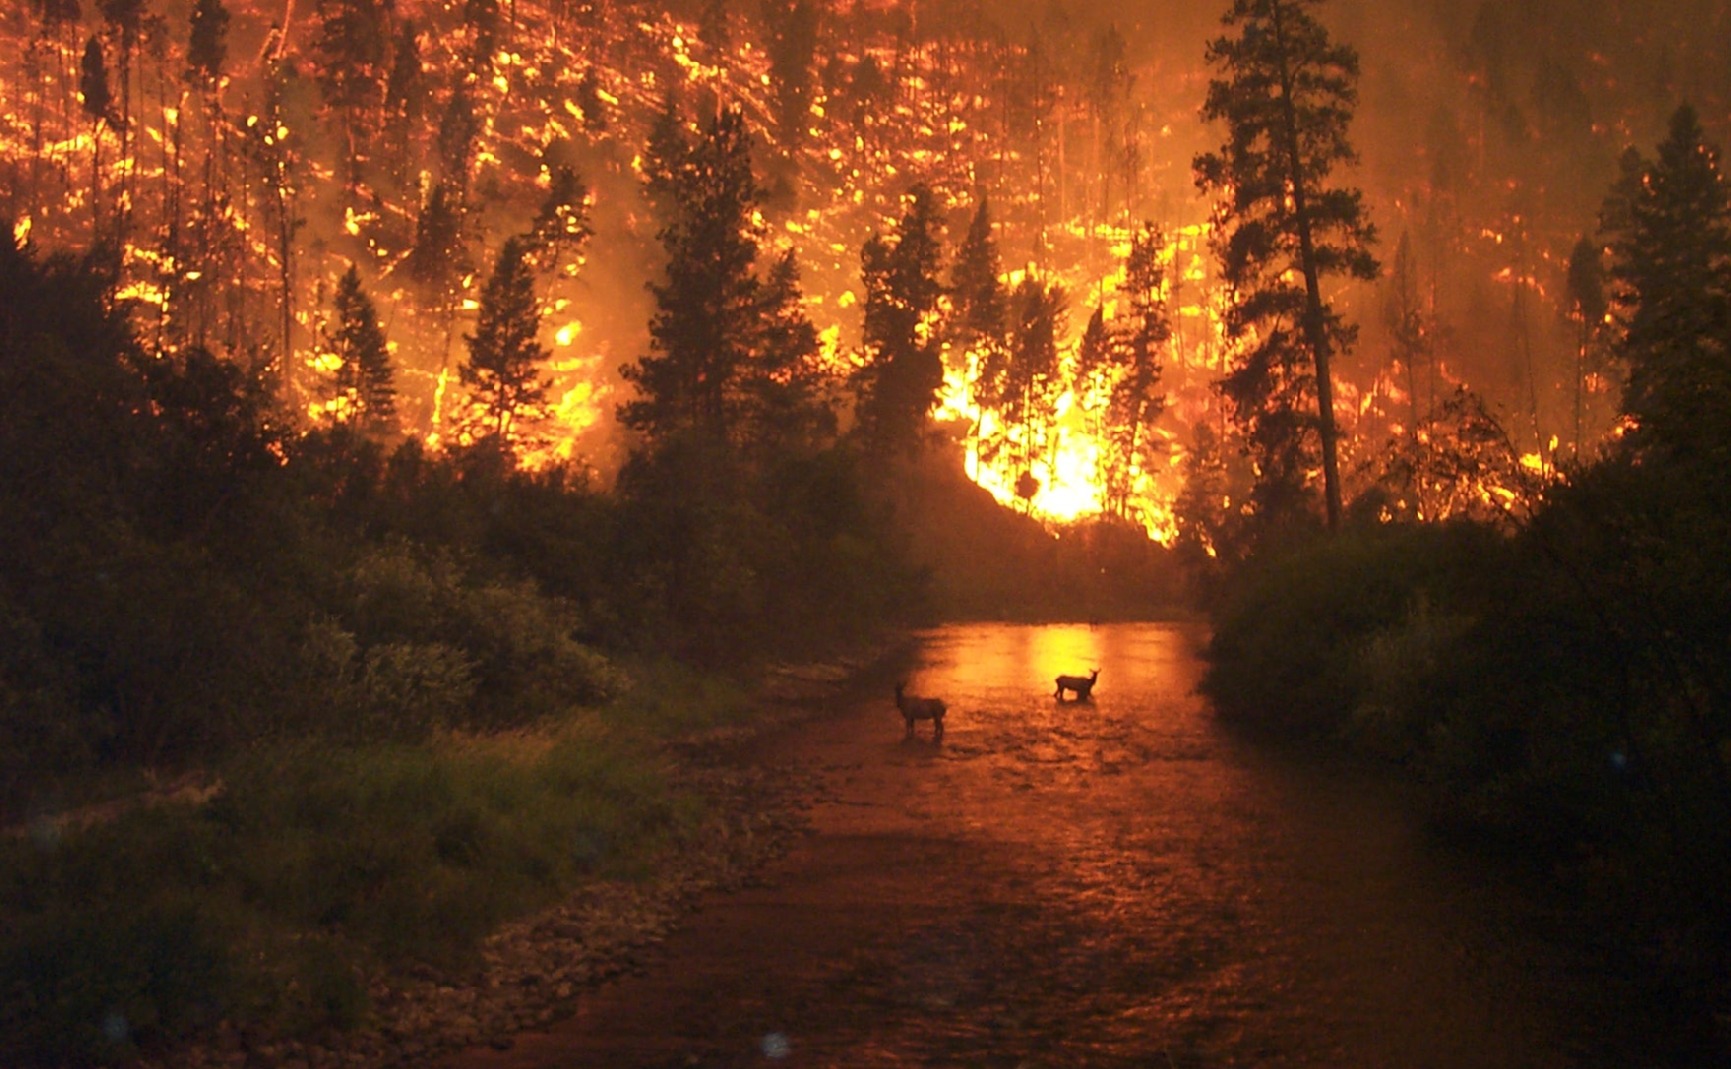 An image of the Bitterroot River Montana forest fire